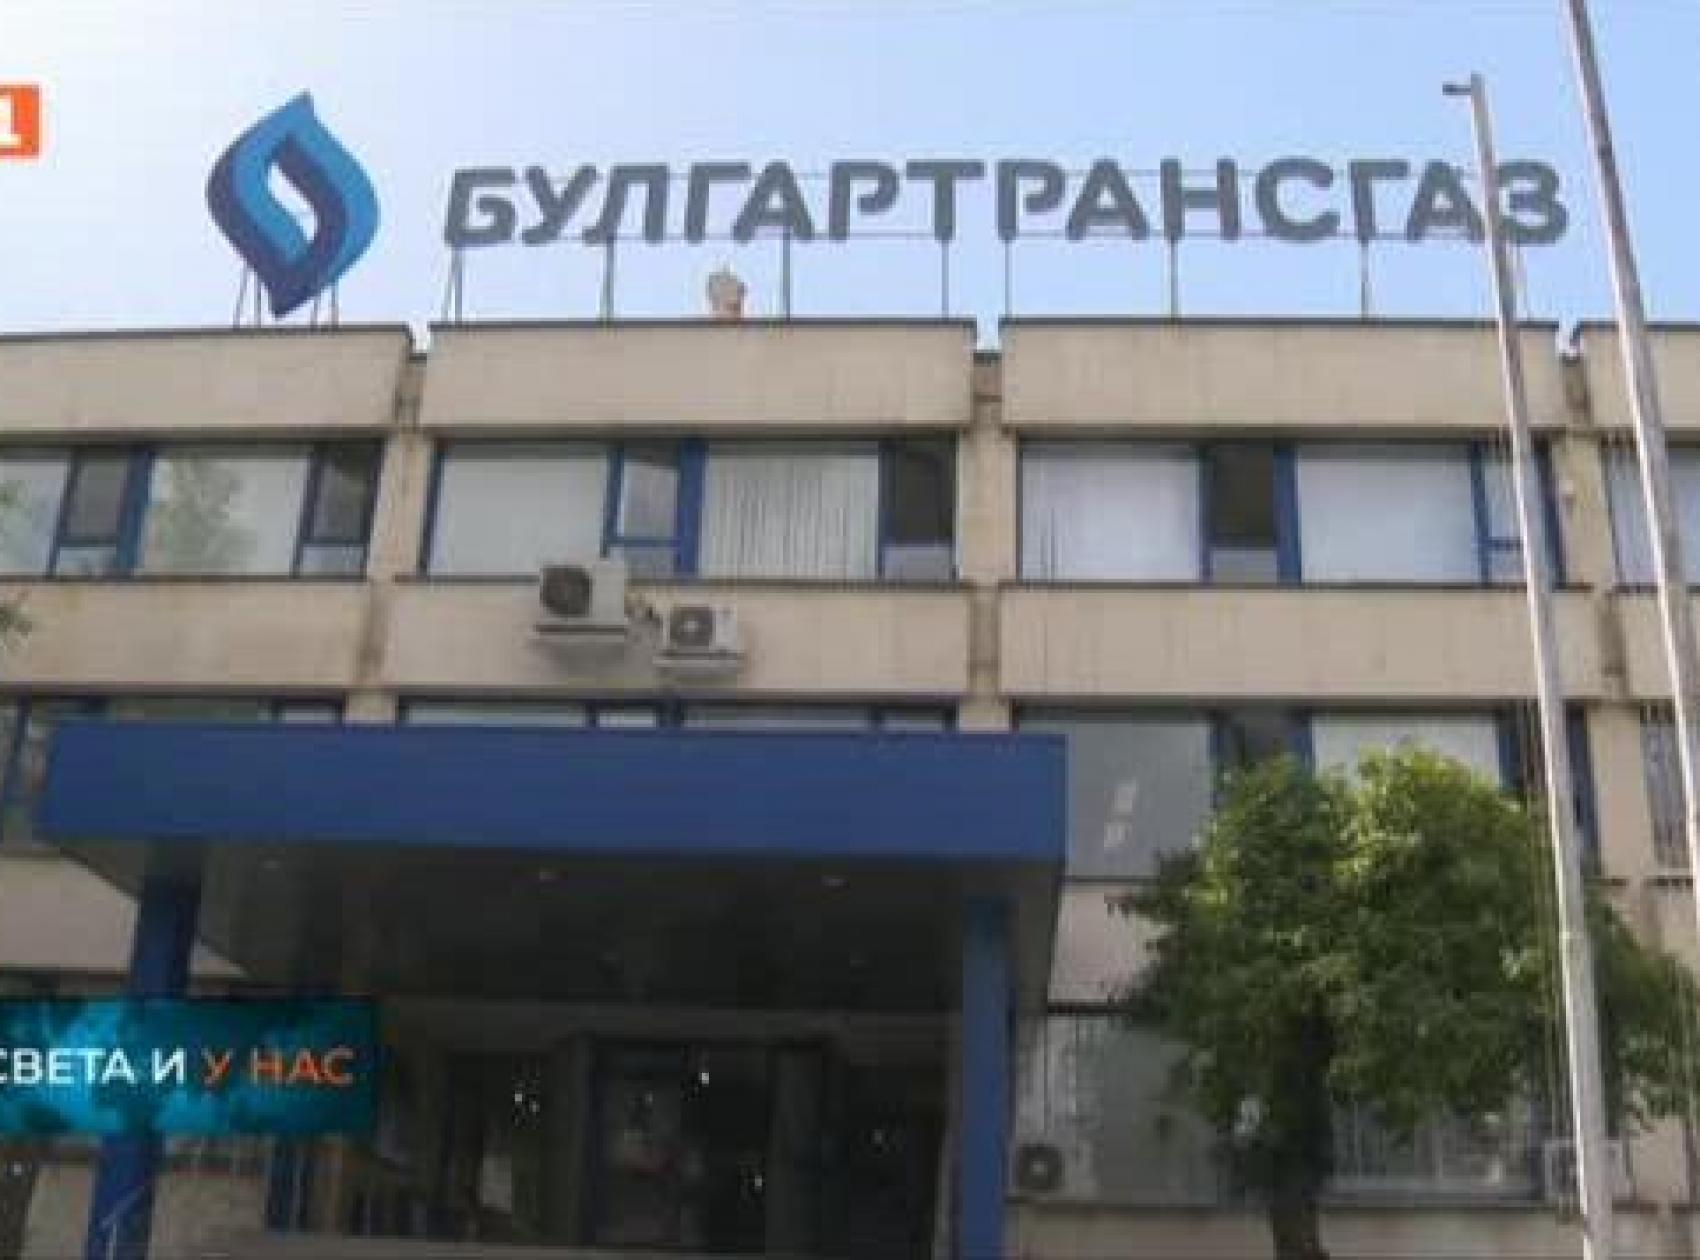 The Bulgarian gas transmission operator Bulgartransgaz EAD has joined the